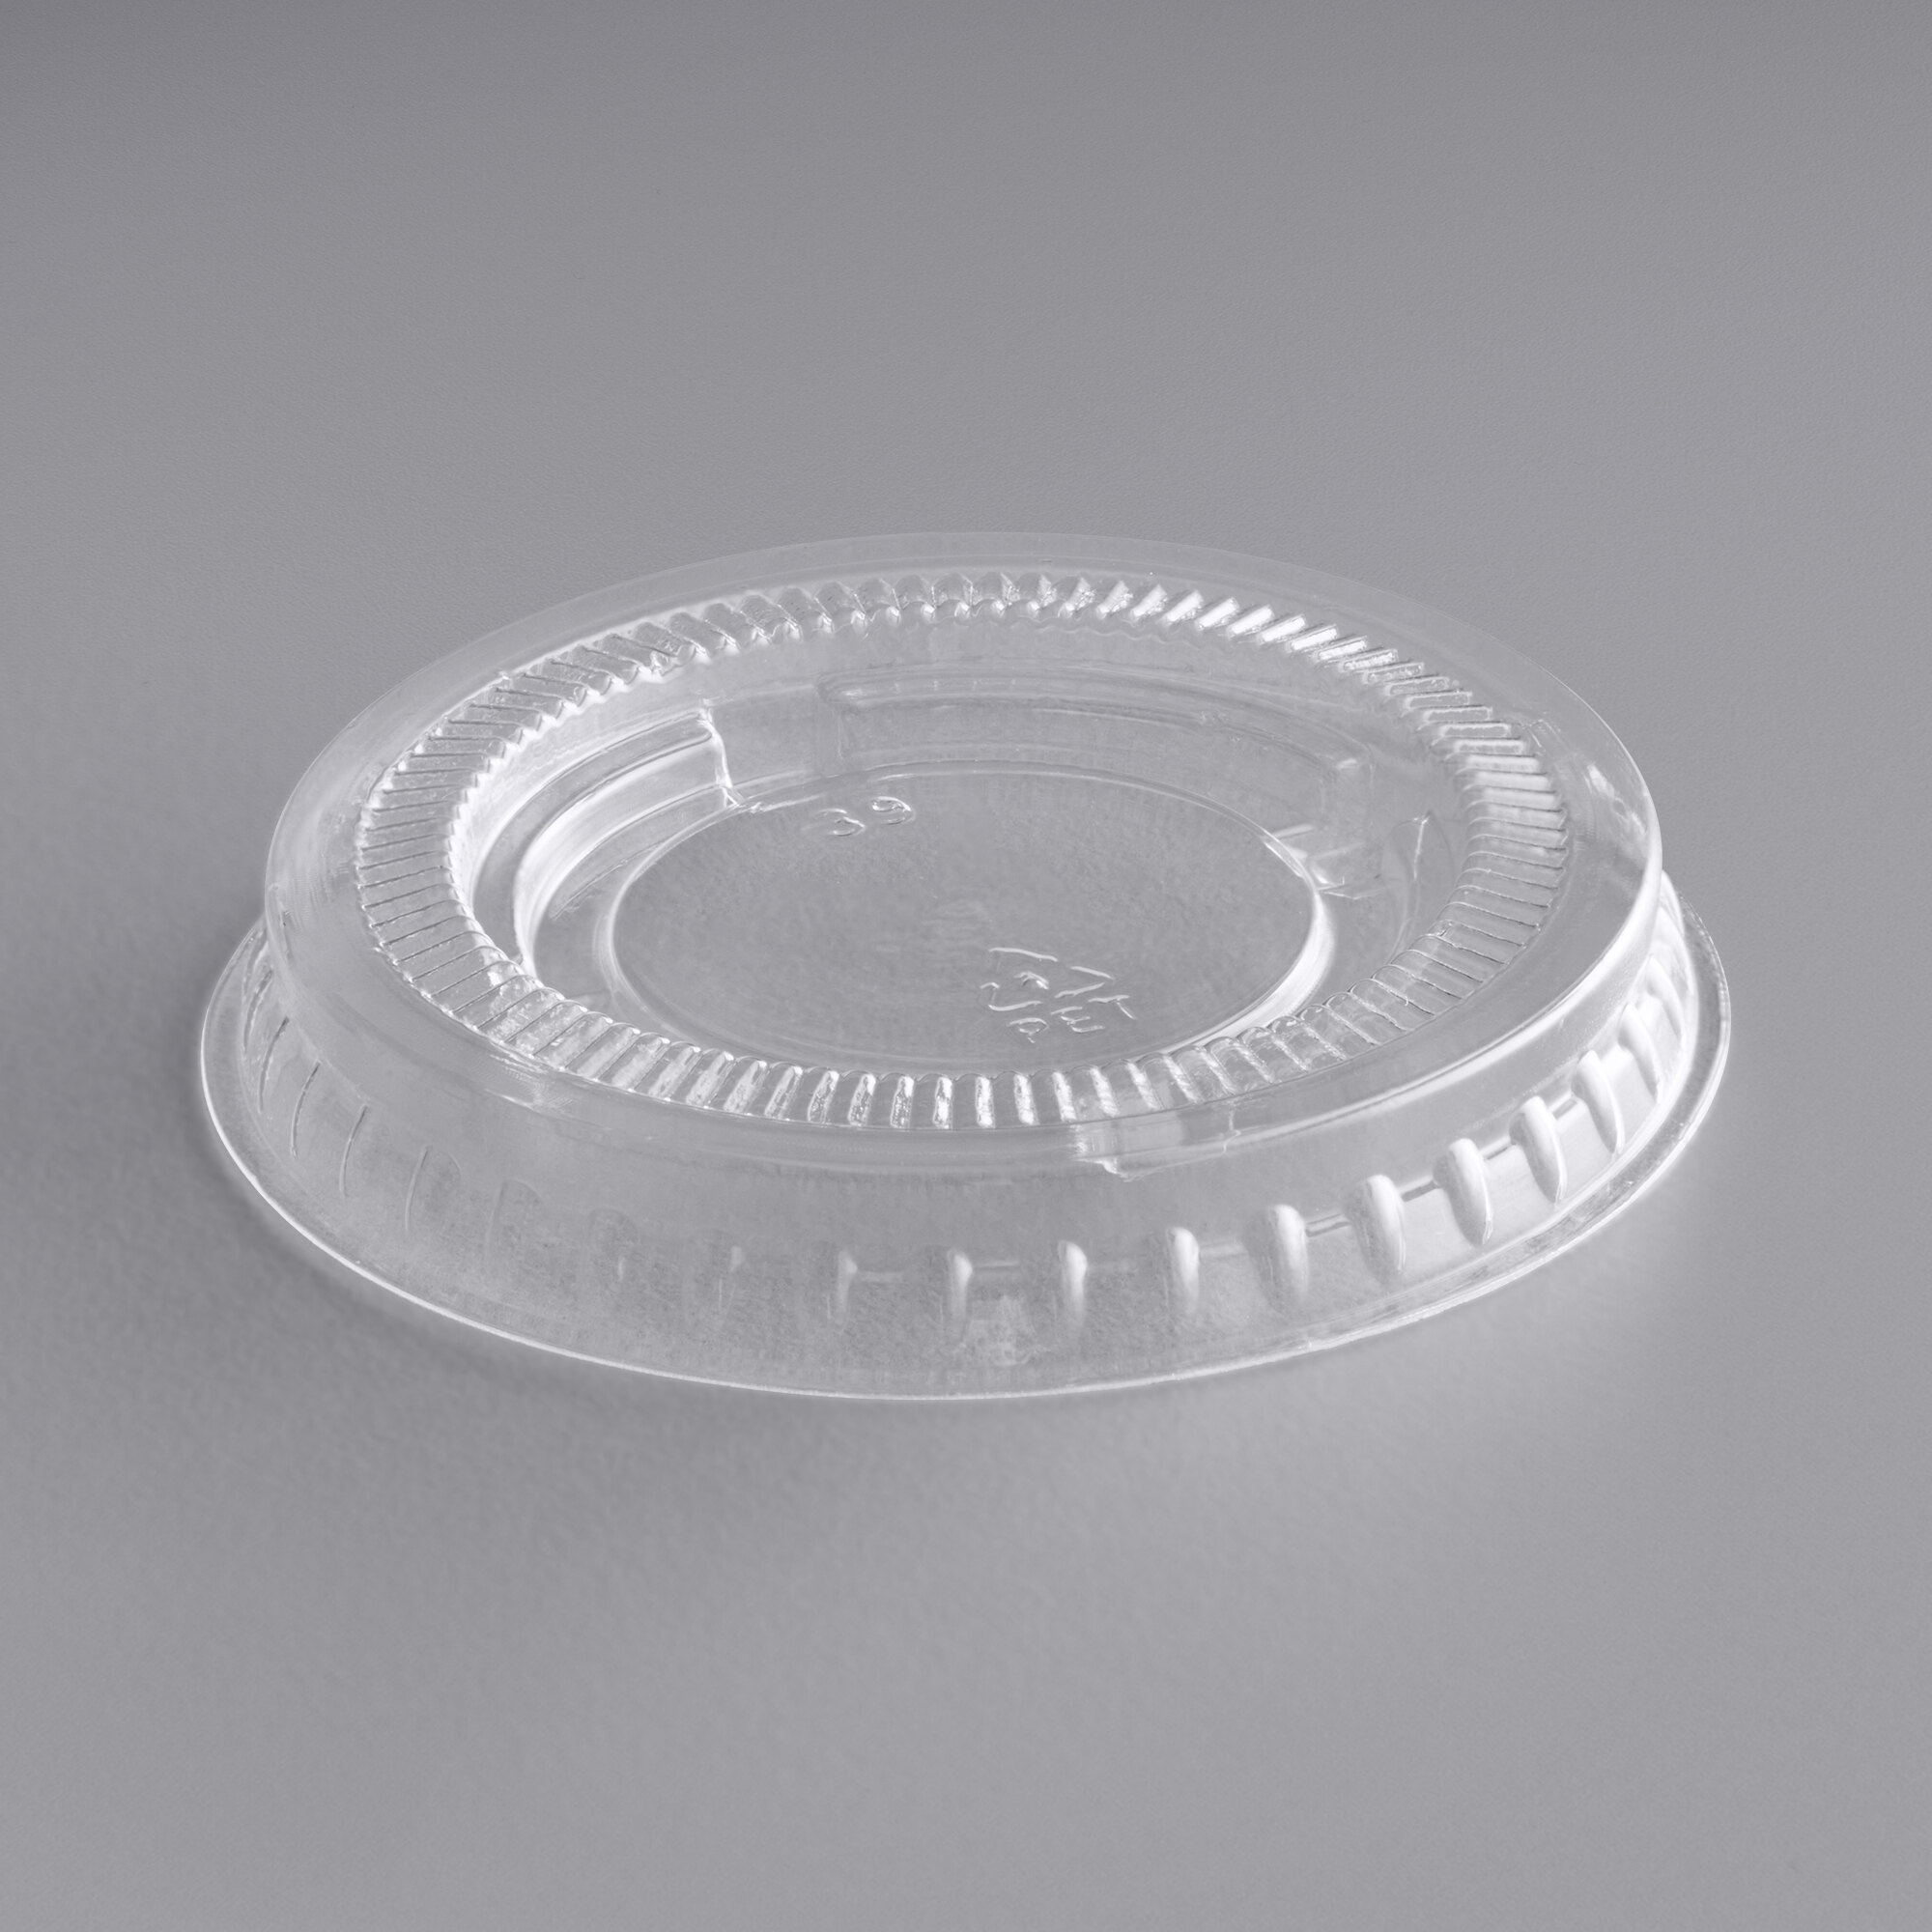 PET Plastic Lid for 0.5 to 1.25 oz. Souffle Cup / Portion Cup 2500/case